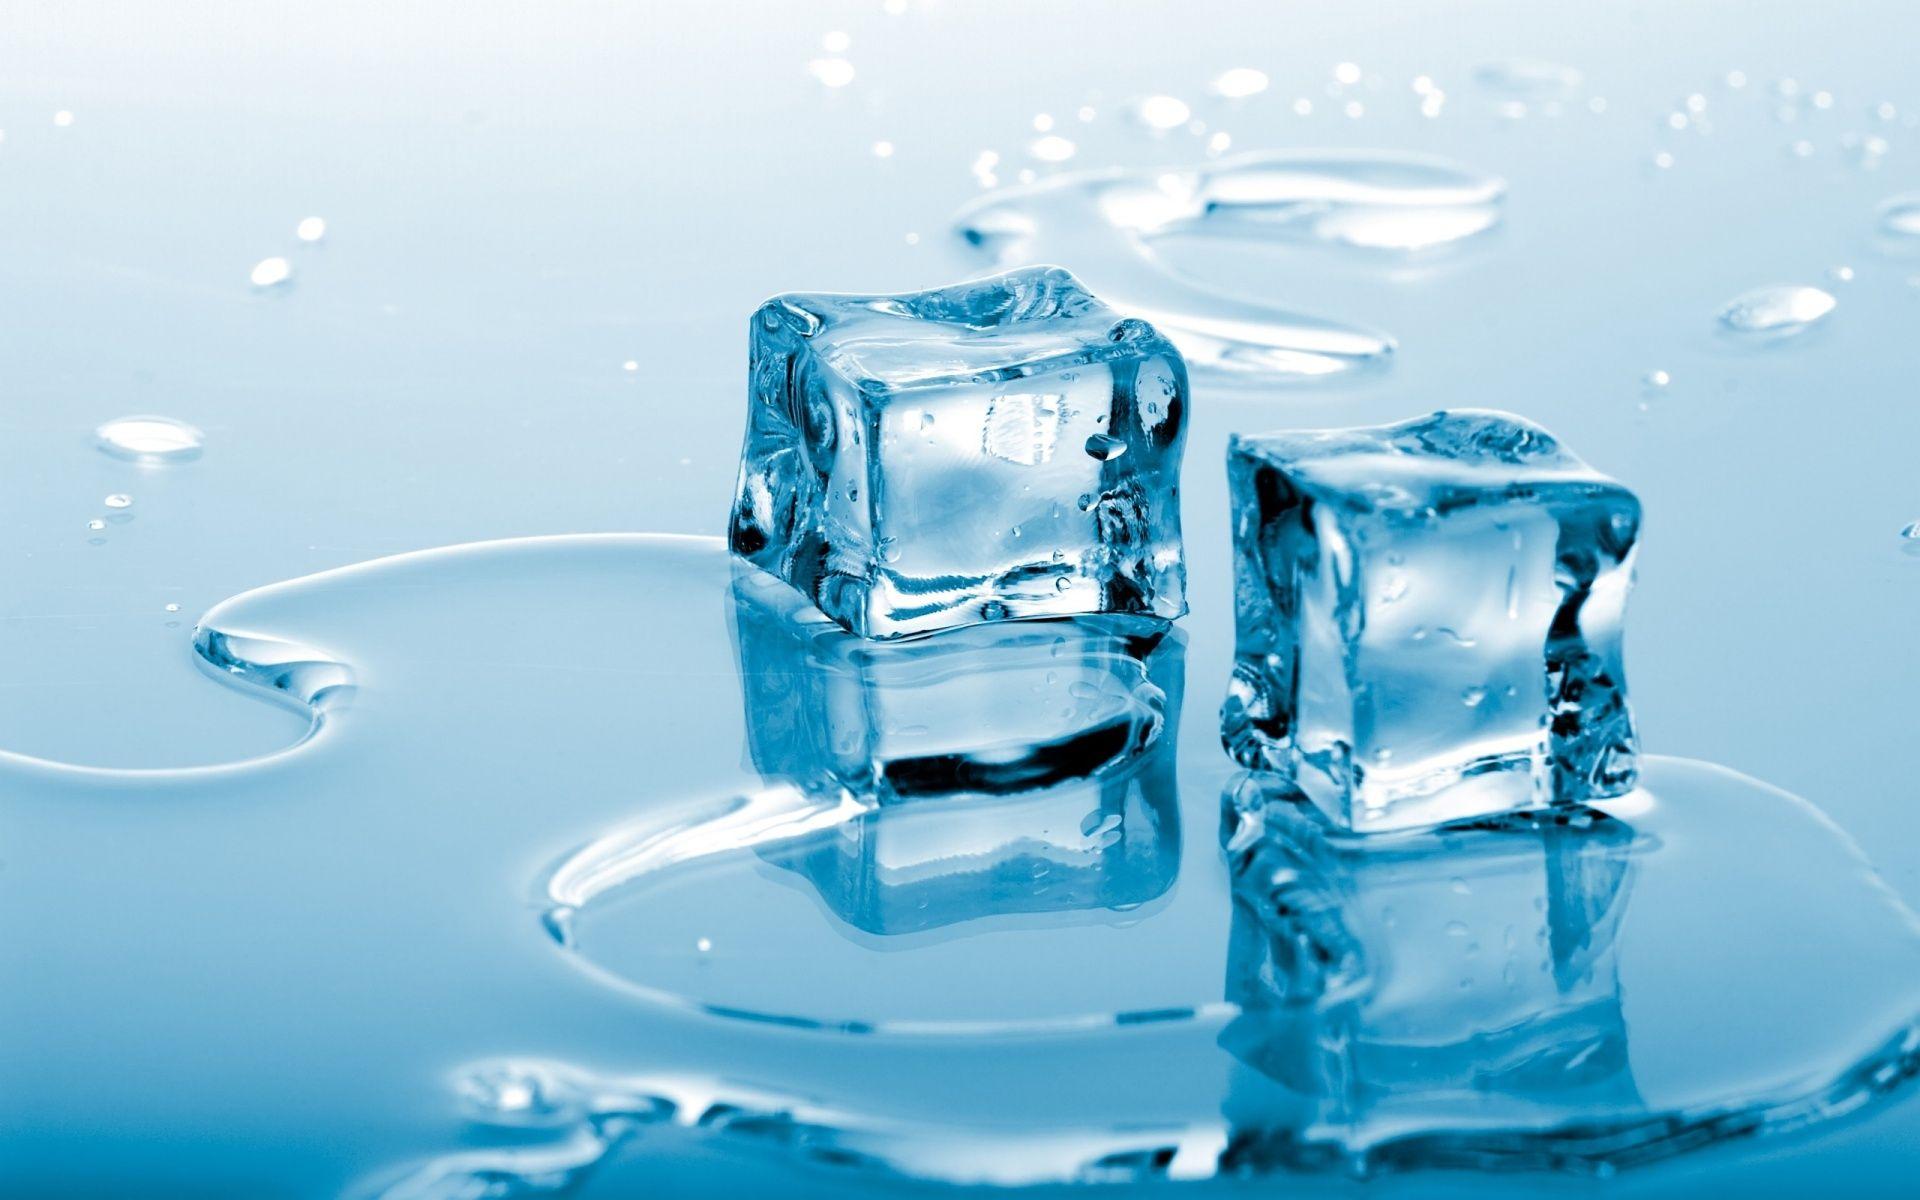 Ice Wallpaper, Hot Ice Image, G.sFDcY Wallpaper